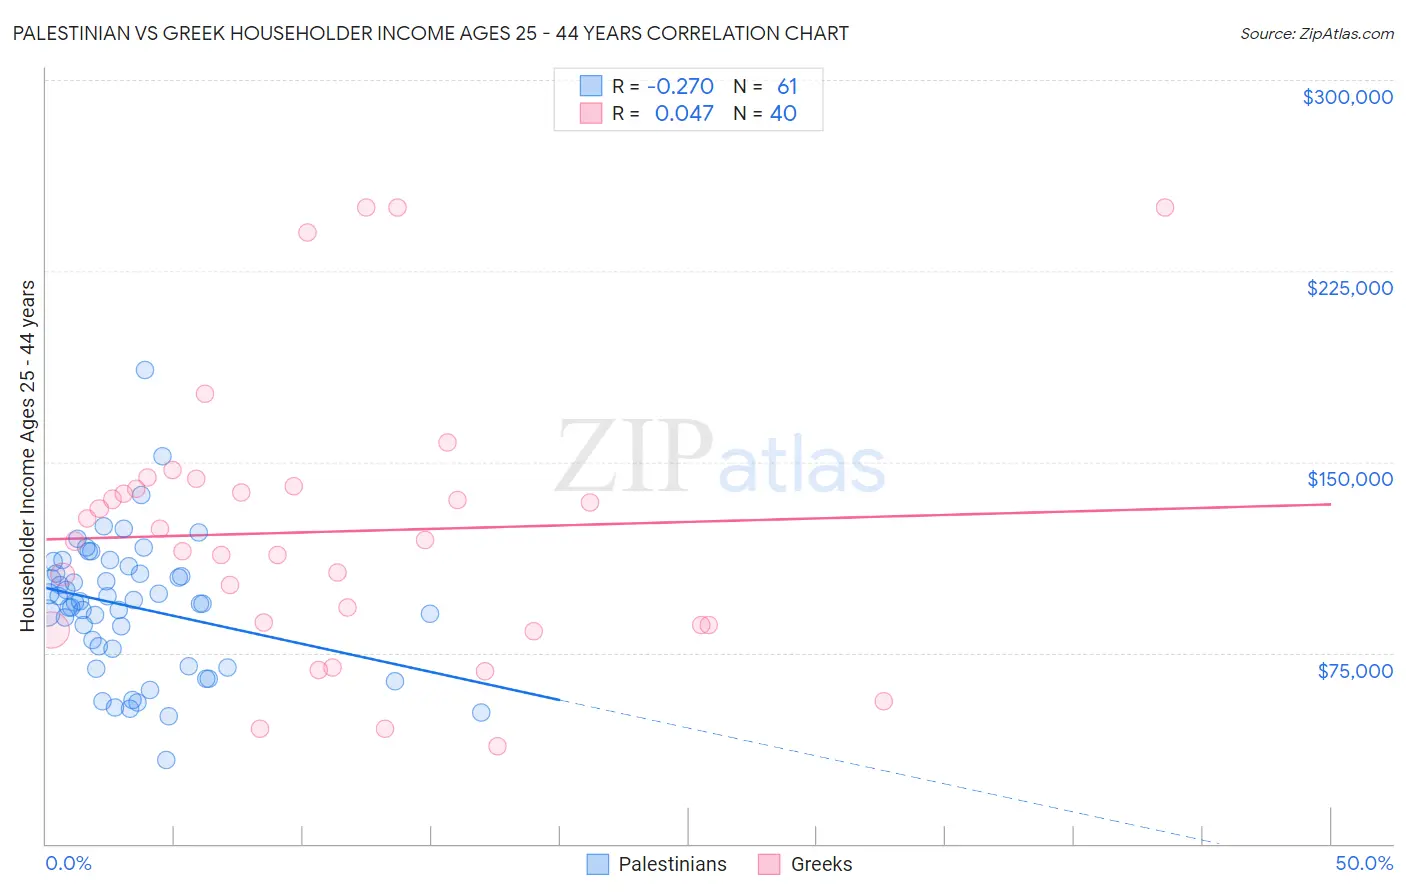 Palestinian vs Greek Householder Income Ages 25 - 44 years